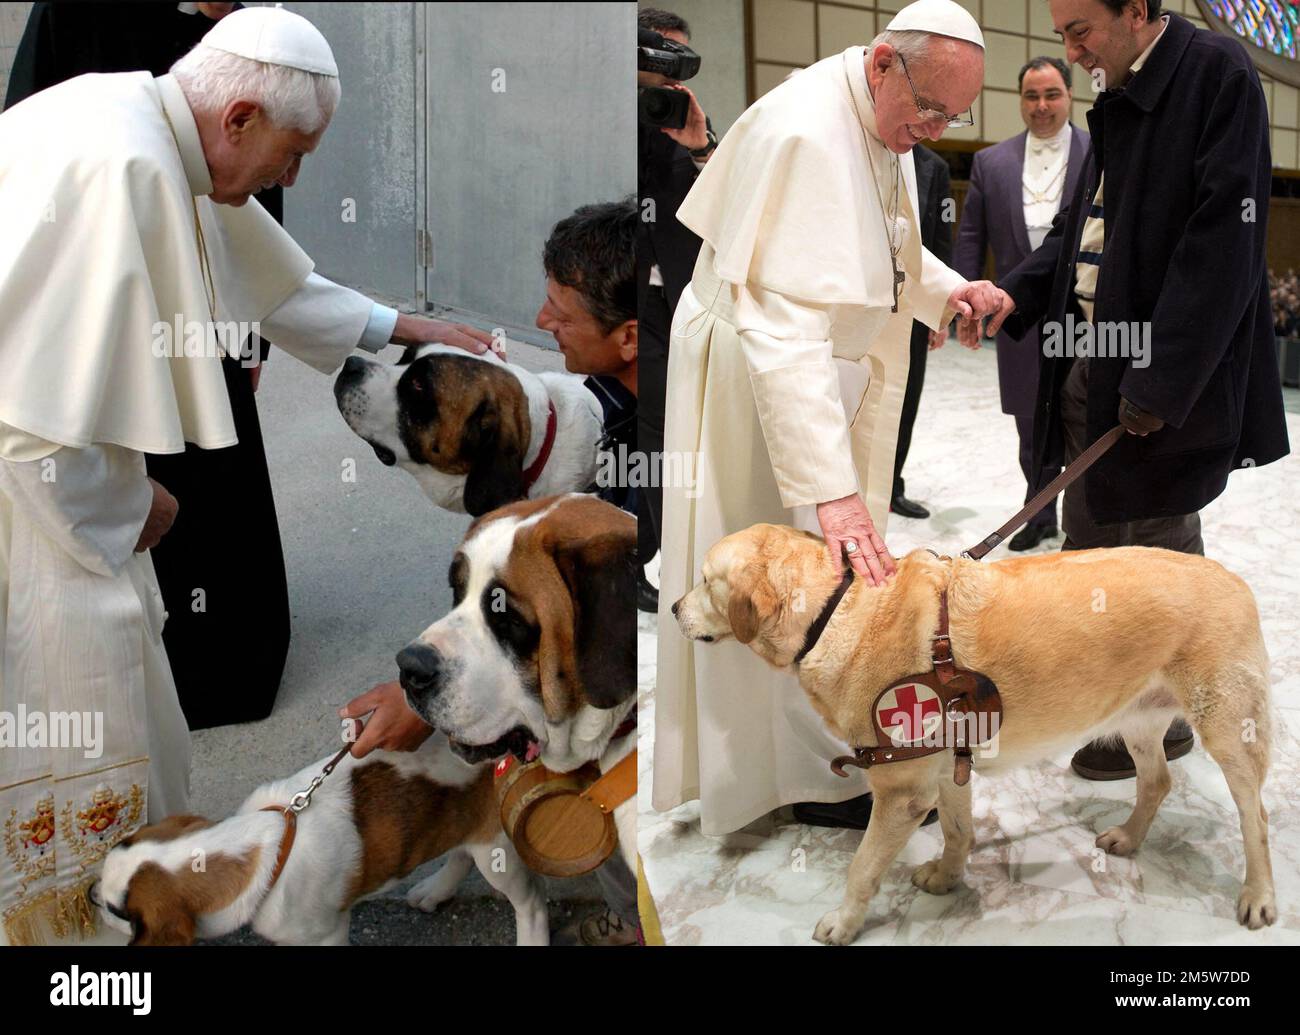 A combo of photos shows , left , Pope Benedict XVI plays with Saint Bernard dogs at the Maison of Saint Bernard in Martigny, in the Swiss part of the Gran San Bernardo mountain in Switzerland July 19, 2006. Pope Francis caresses a guide dog during a meeting with the media at the Pope VI hall, at the Vatican, on March 16, 2013. - Former Pope Benedict XVI has died at his Vatican residence, aged 95, almost a decade after he stood down because of ailing health. He led the Catholic Church for less than eight years until, in 2013, he became the first Pope to resign since Gregory XII in 1415. Photo b Stock Photo